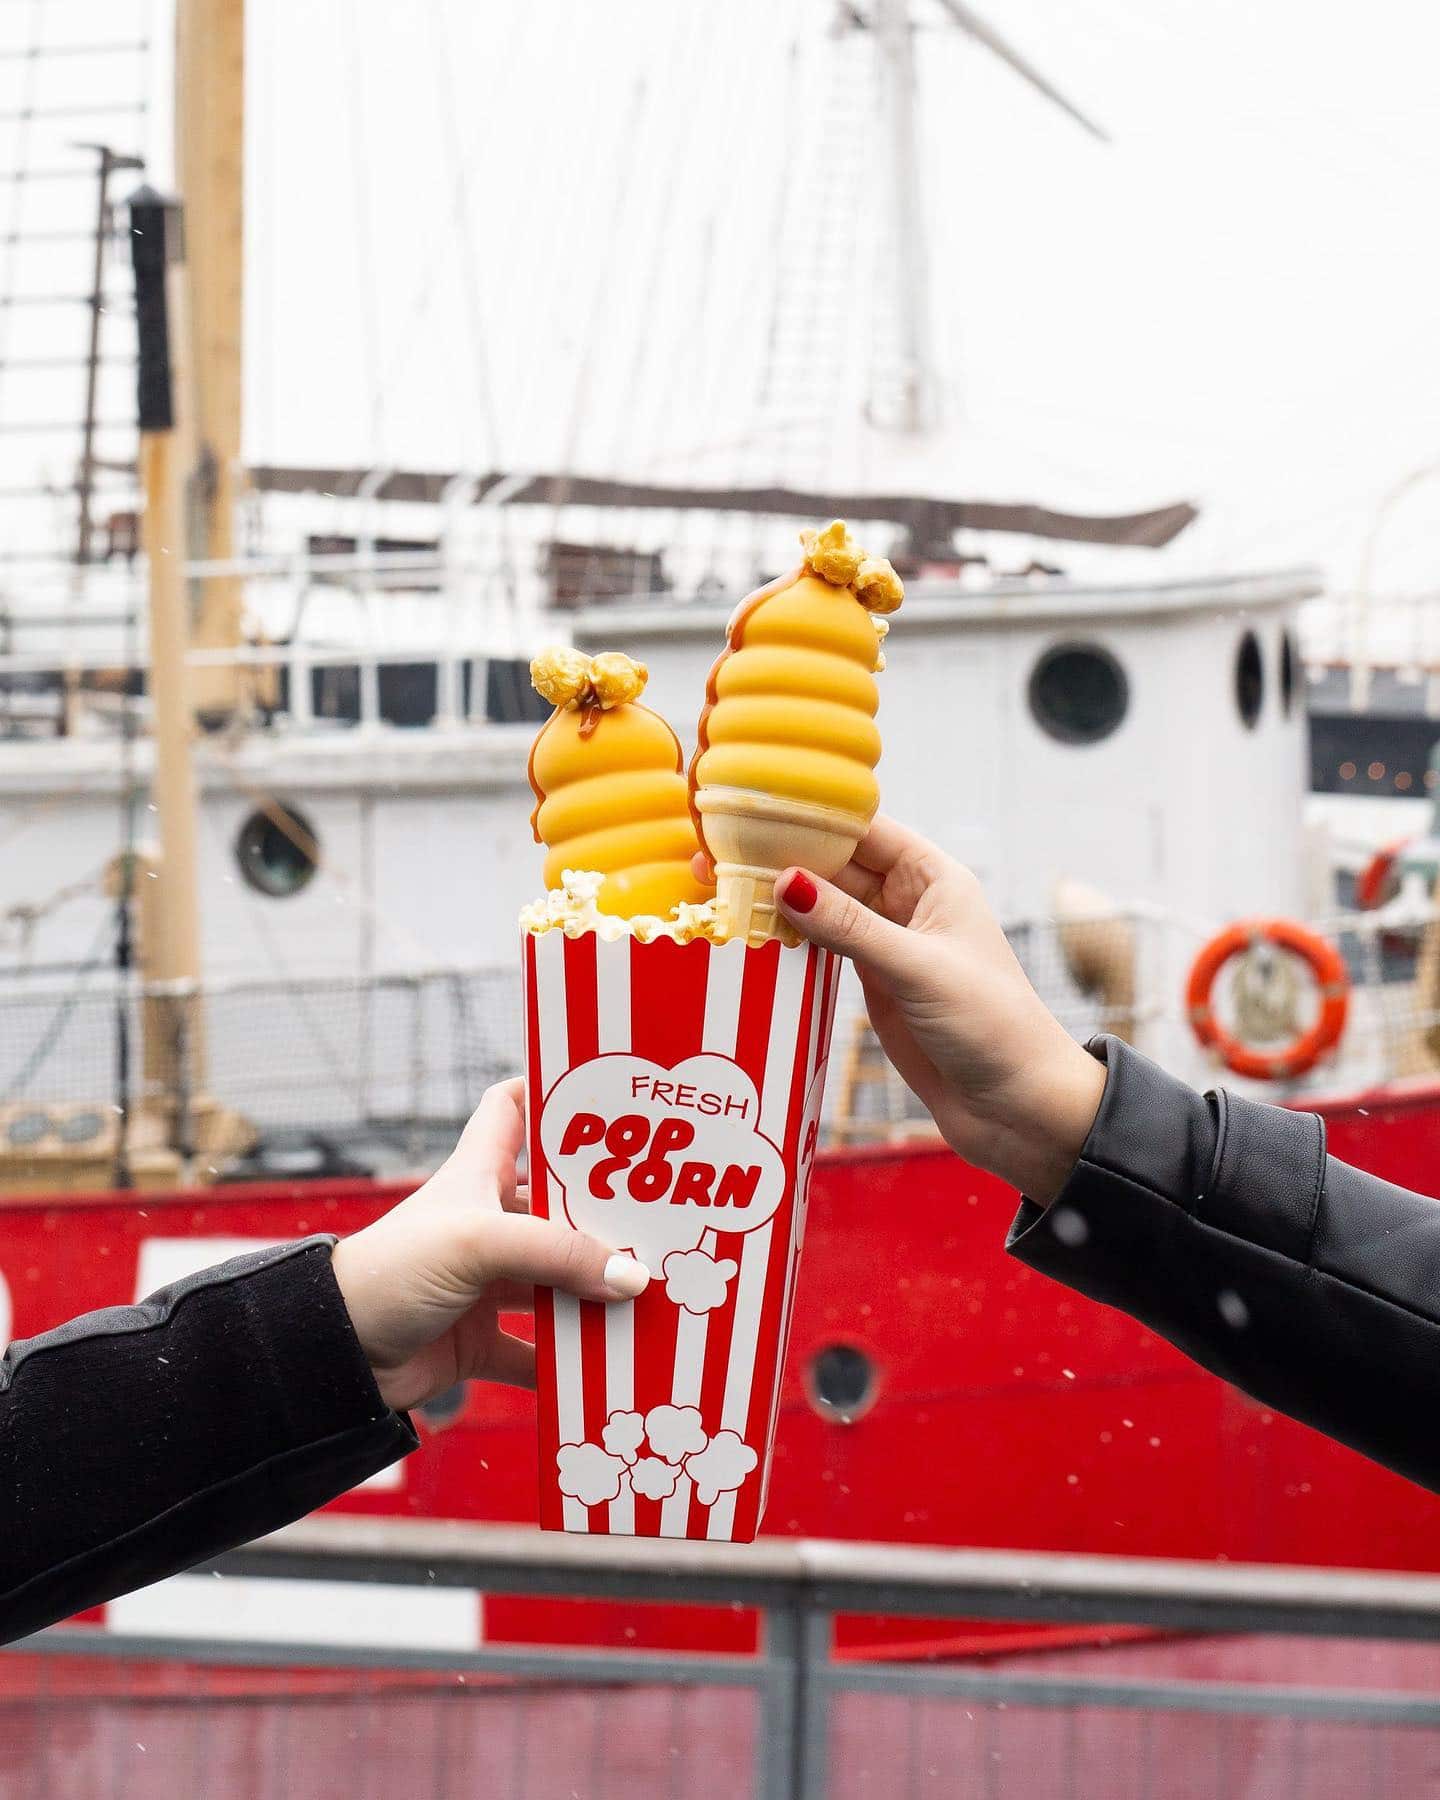 Lights. Camera. Action. The JACKER CRAX cone → now available @eatmisterdips. #TheSeaport